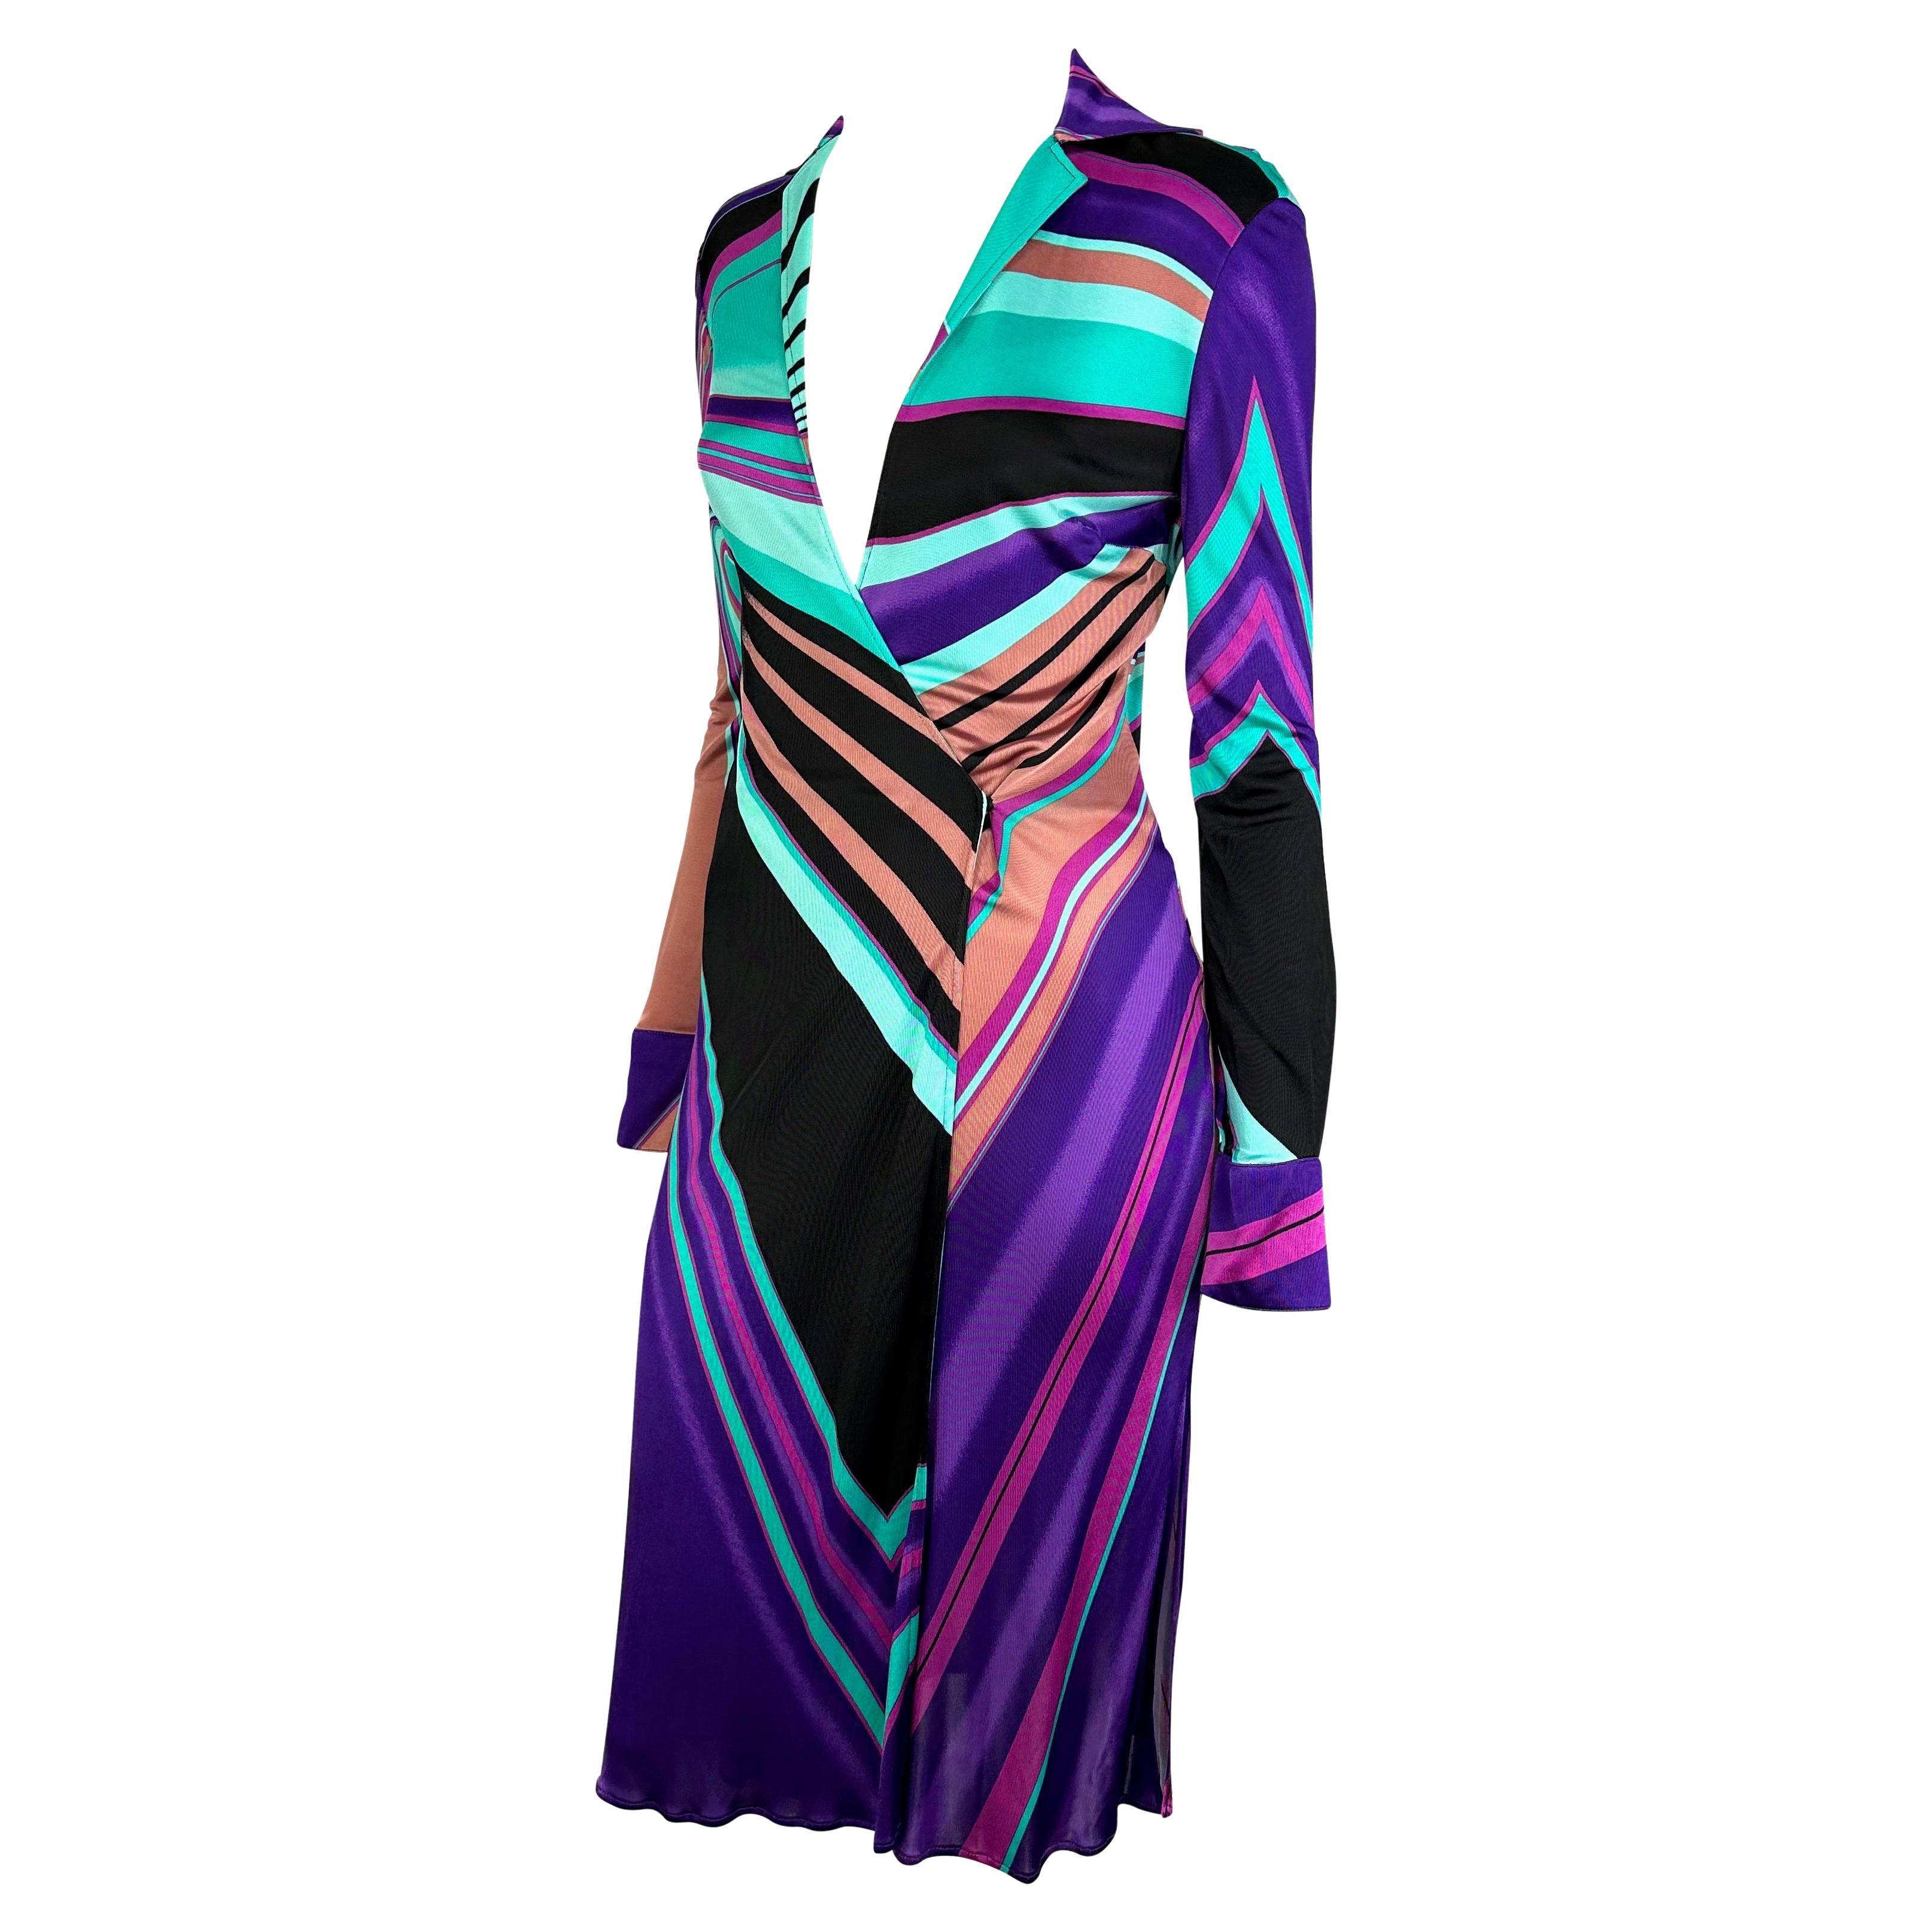 Presenting a fabulous blue and purple slinky Gianni Versace dress, designed by Donatella Versace. From the Fall/Winter 2000 collection, this dress is covered in a multicolor abstract print. The dress features a plunging neckline, collar, long